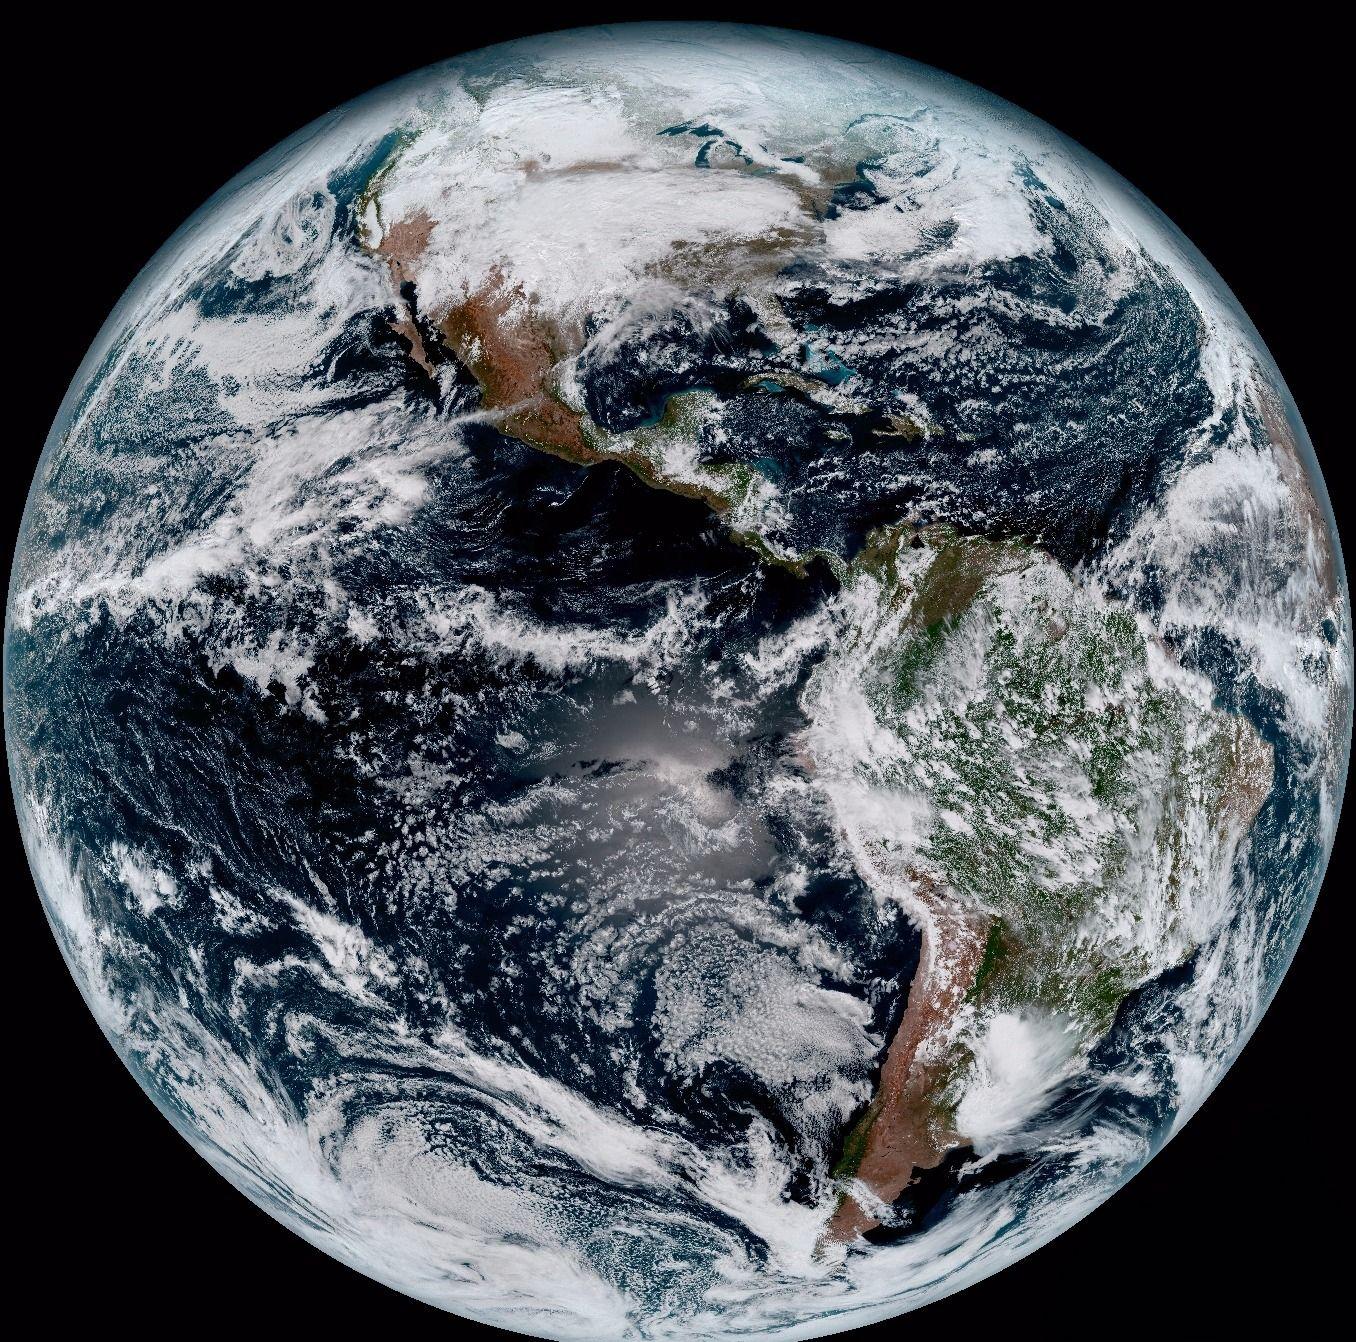 New Weather Satellite Sends First Image of Earth